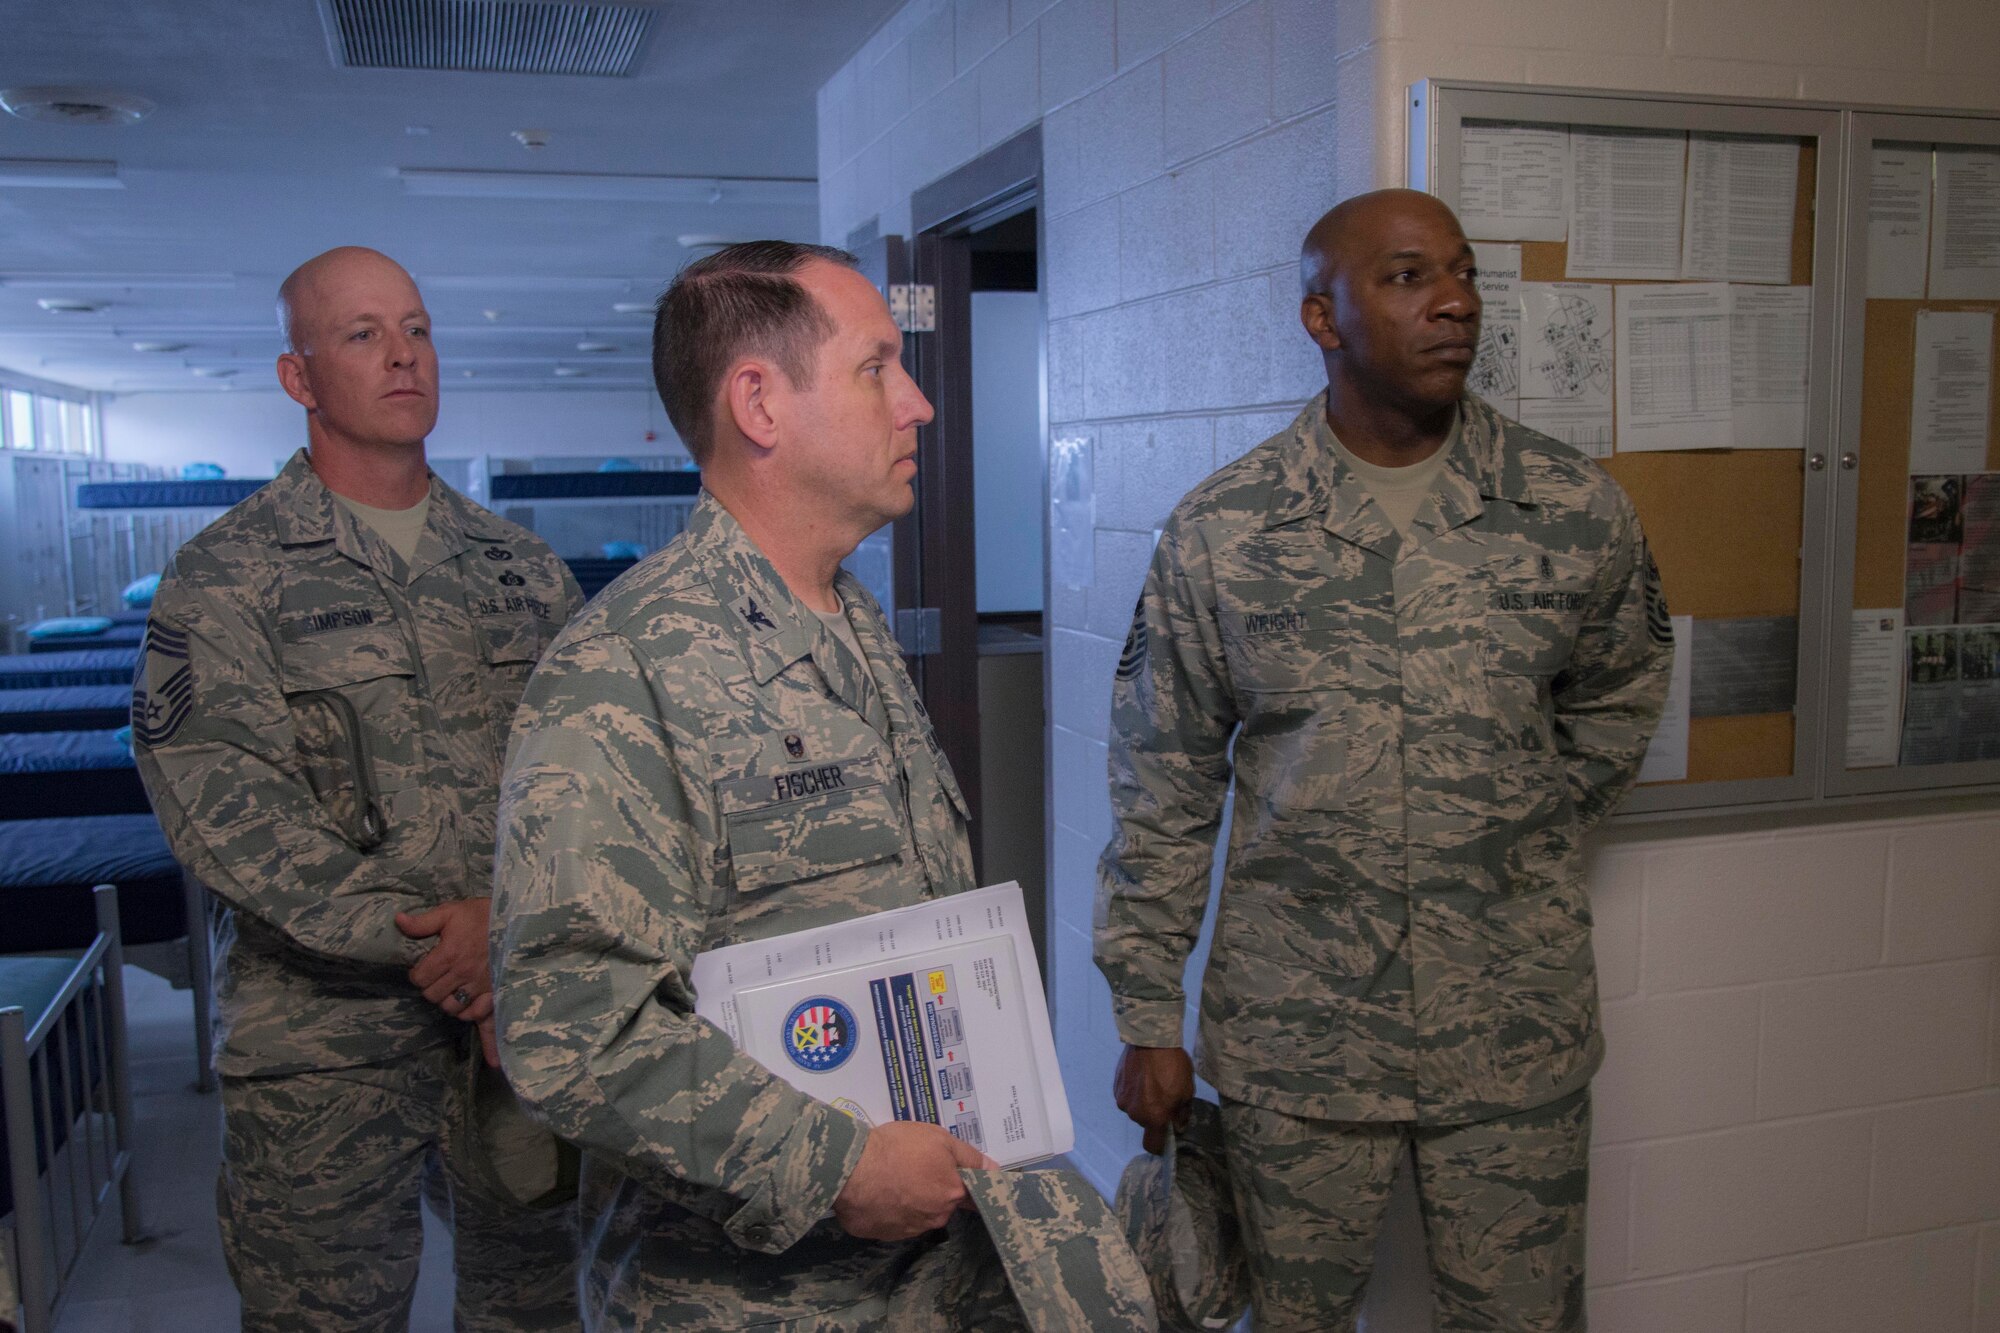 Col. William Fischer, commander of the 737th Training Group, left, Chief Master Sgt.
Of the Air Force Kaleth O. Wright, center, and Chief Master Sgt. Daniel Simpson,
superintendent of the 737th TRG, tour the 324th Training Squadron at Joint Base San
Antonio-Lackland, Texas May 3, 2017. The CMSAF visited JBSA-Lackland on his
initial immersion tour of Air Force Basic Military Training and Airmen’s Week, a
week-long discussion-based course designed to help new Airmen internalize the Air
Force core values while developing professionalism, resiliency and an Airmen’s
corps inspired by heritage and motivated to deliver Air Power for America. (U.S. Air
Force photo by Airman Dillon Parker)